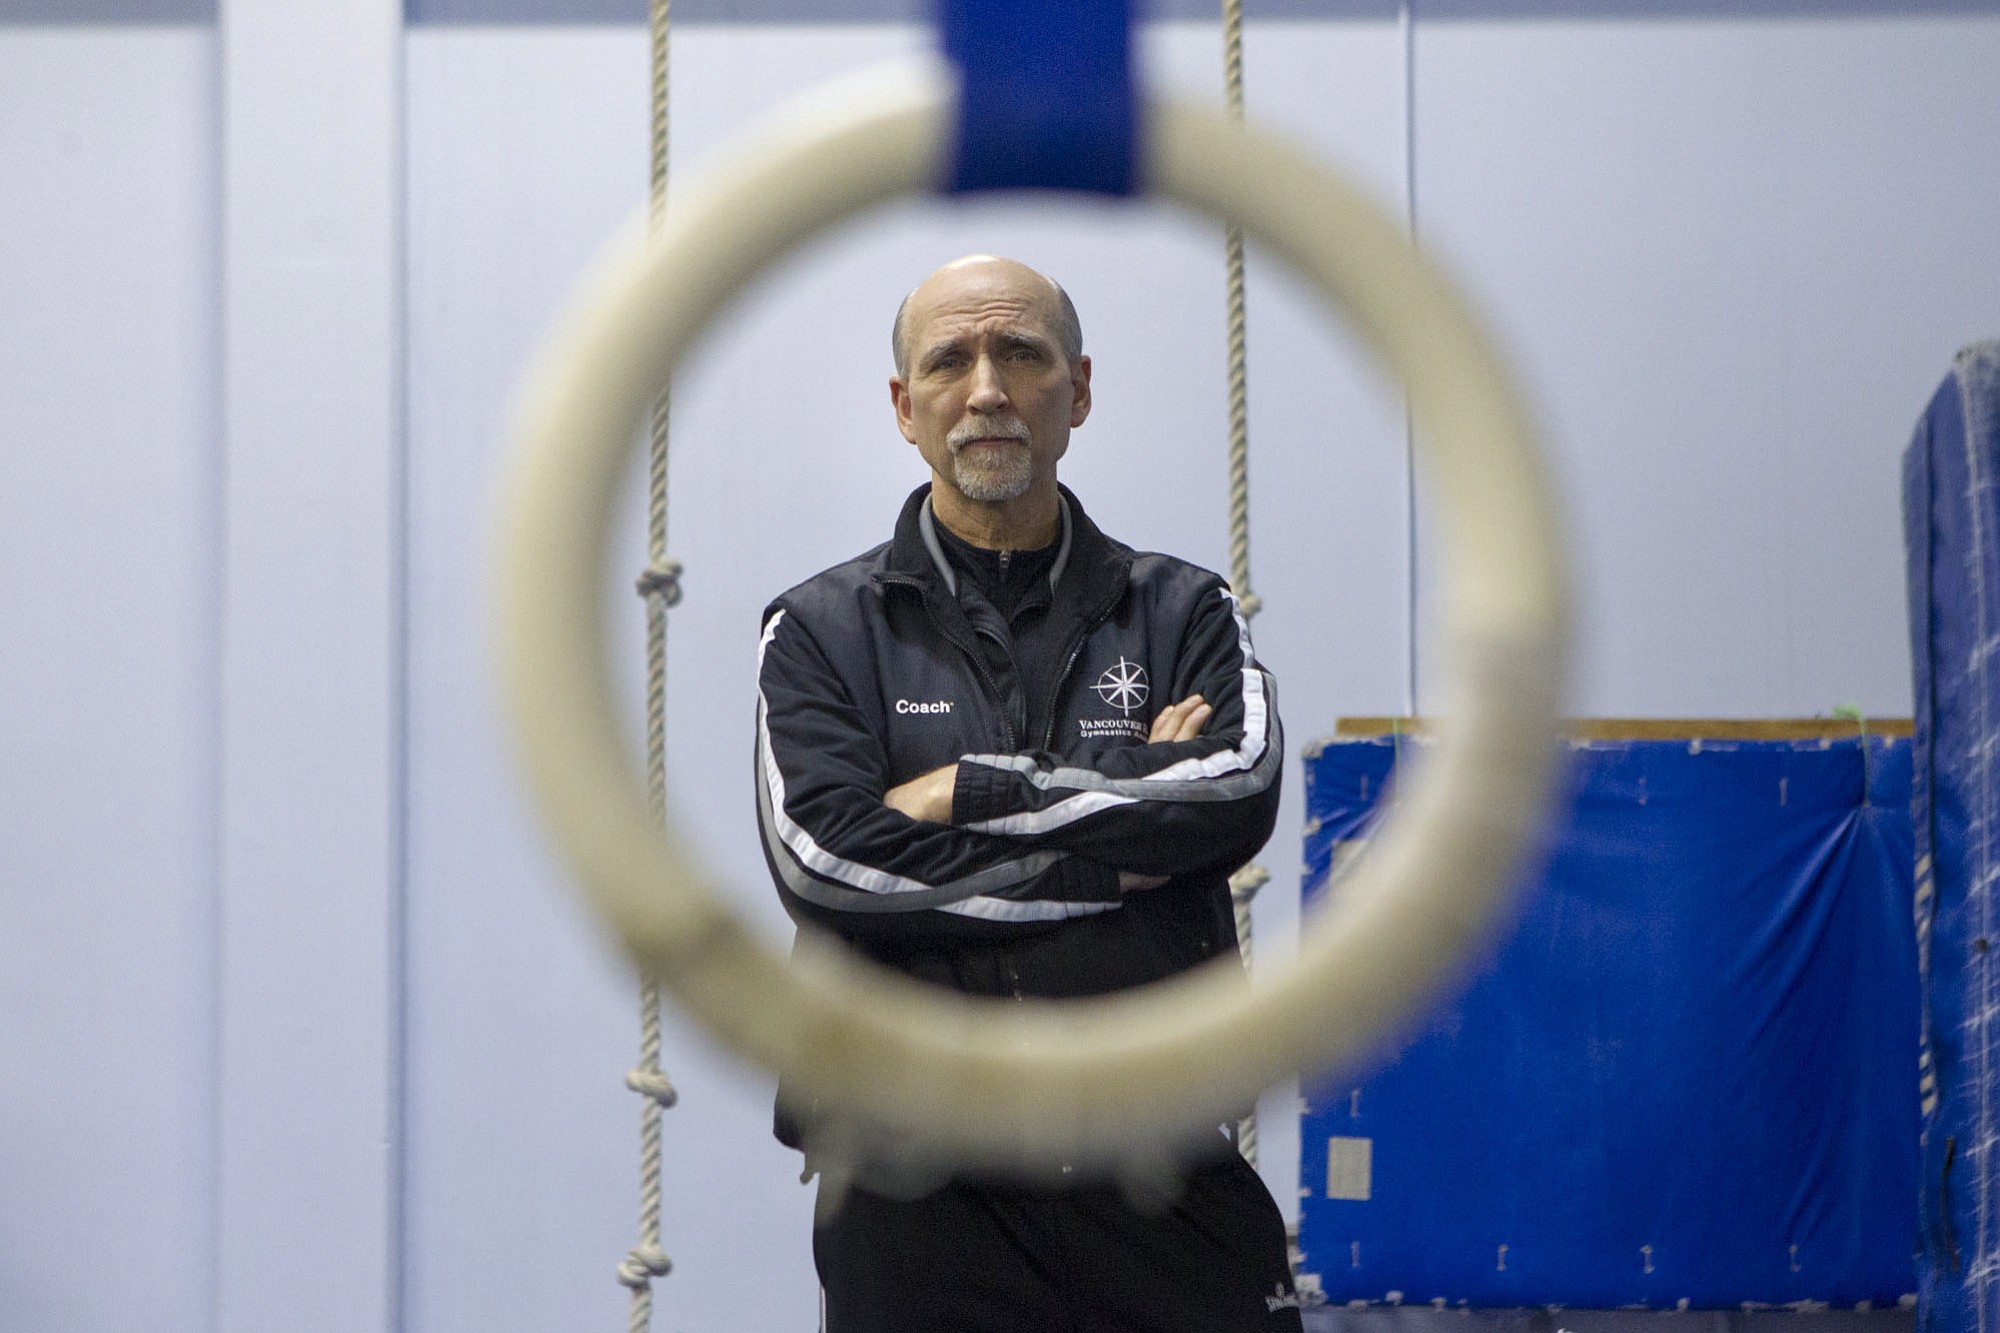 Gymnastics coach Randy Fox, who was inducted into a regional USA Gymnastics hall of fame in 2014, at his gym in Camas.